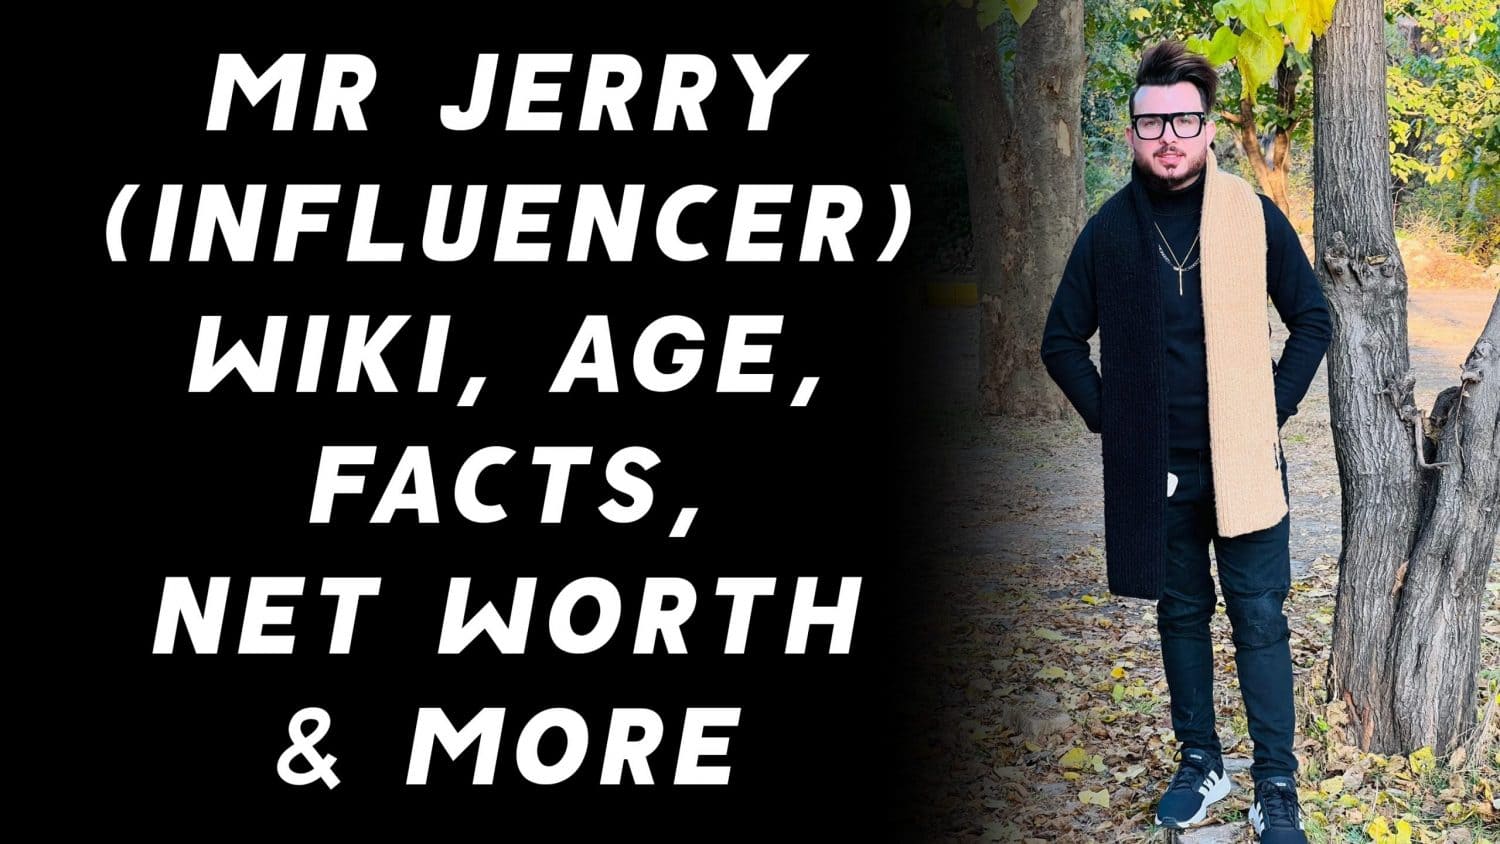 Mr Jerry (Influencer) Wiki, Age, Facts, Net Worth & More 1